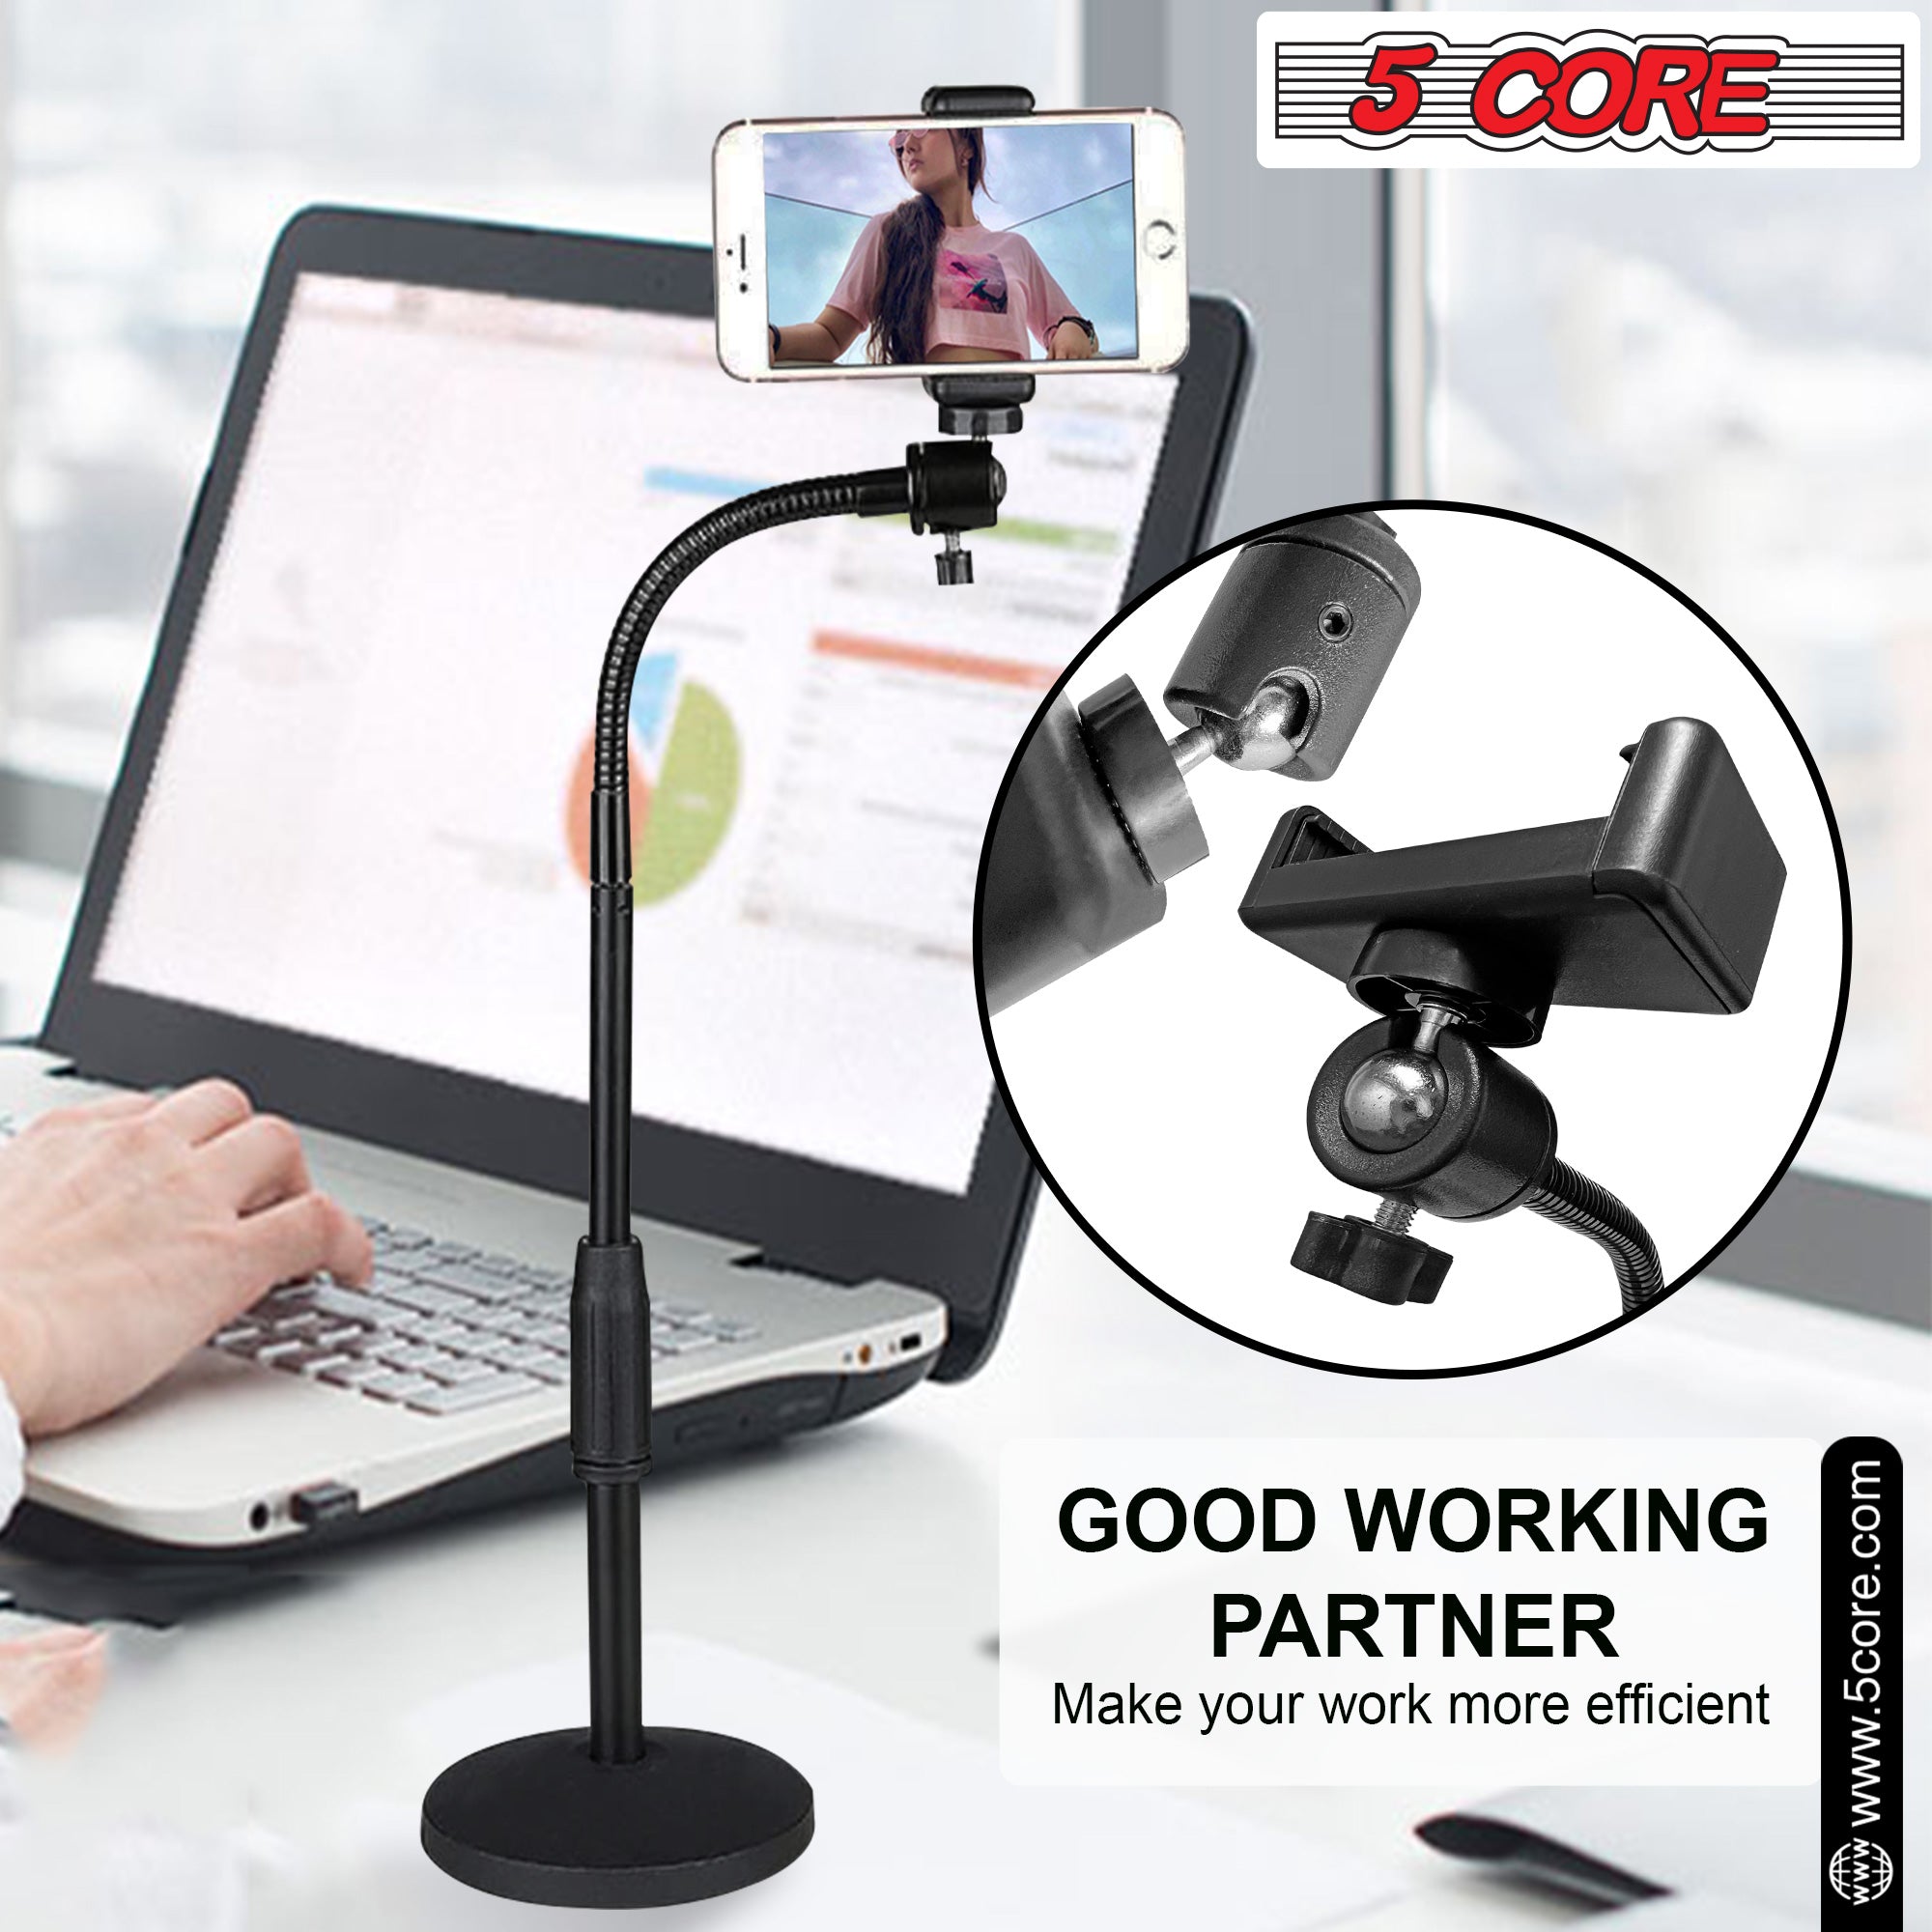 5 Core Cell Phone Stand Adjustable Height & Angle Gooseneck Stand for Desk Flexible Arm Mobile Holder Compatible with 3.5 to 6.5 Inch Device -RBS MOB